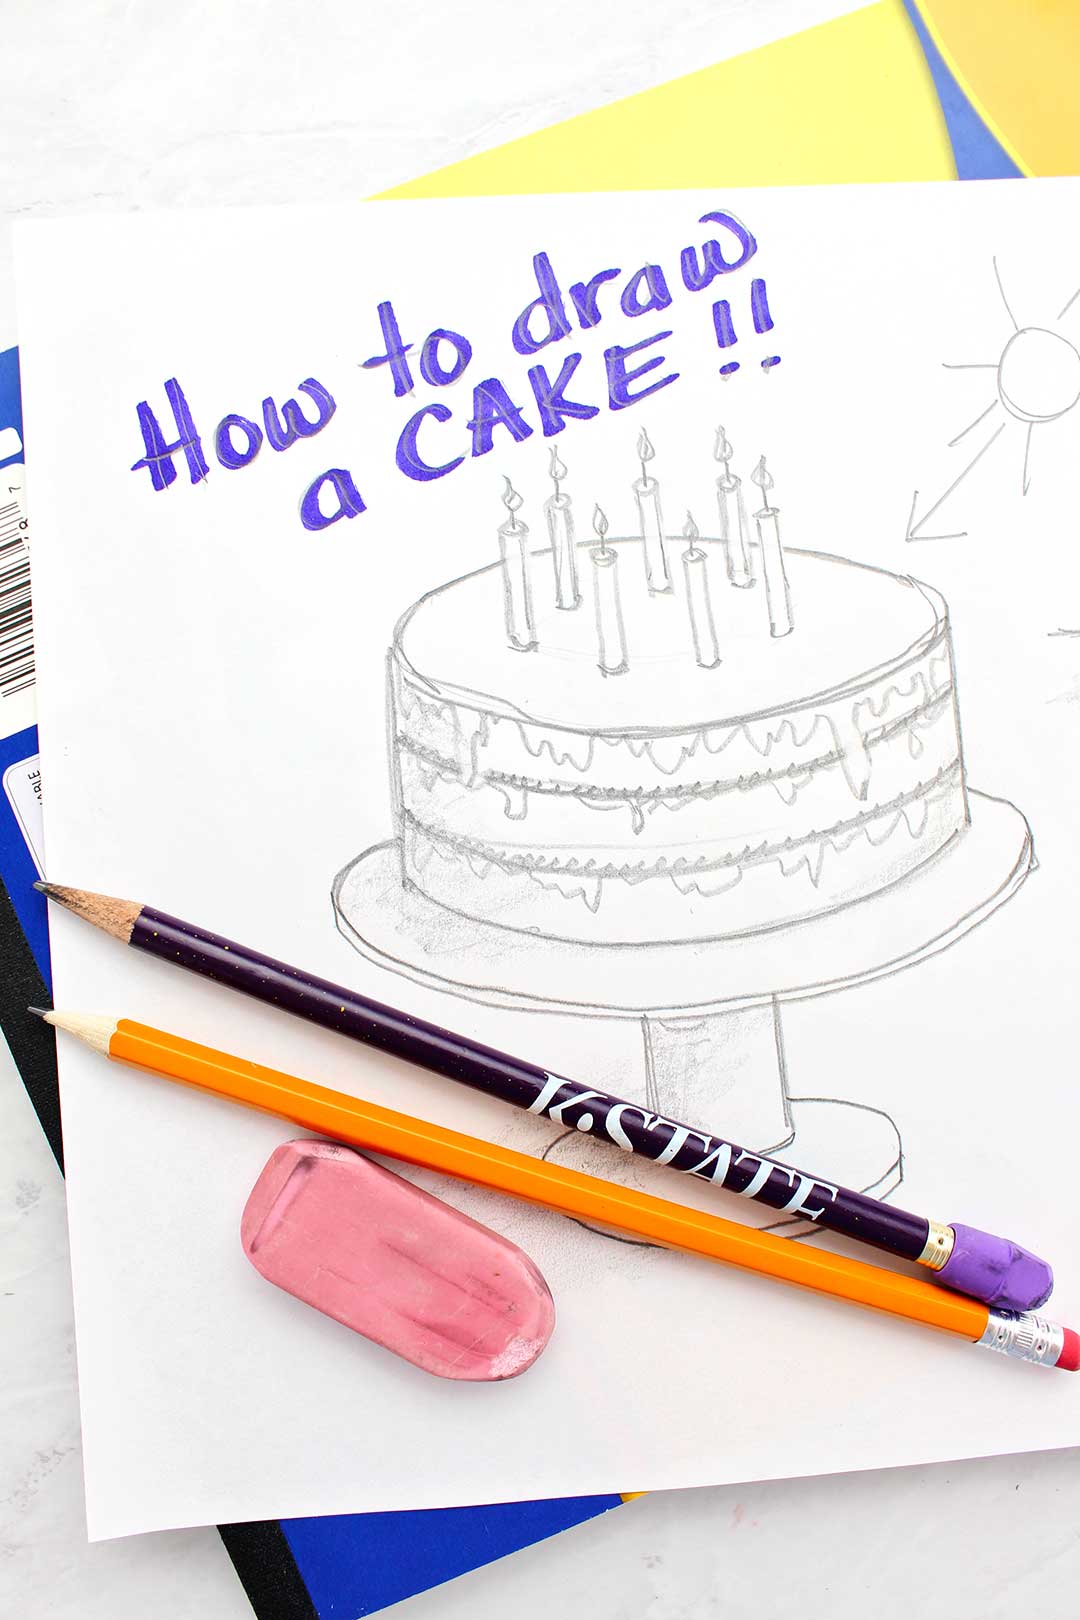 Birth cake cartoon coloring page for kids Vector Image